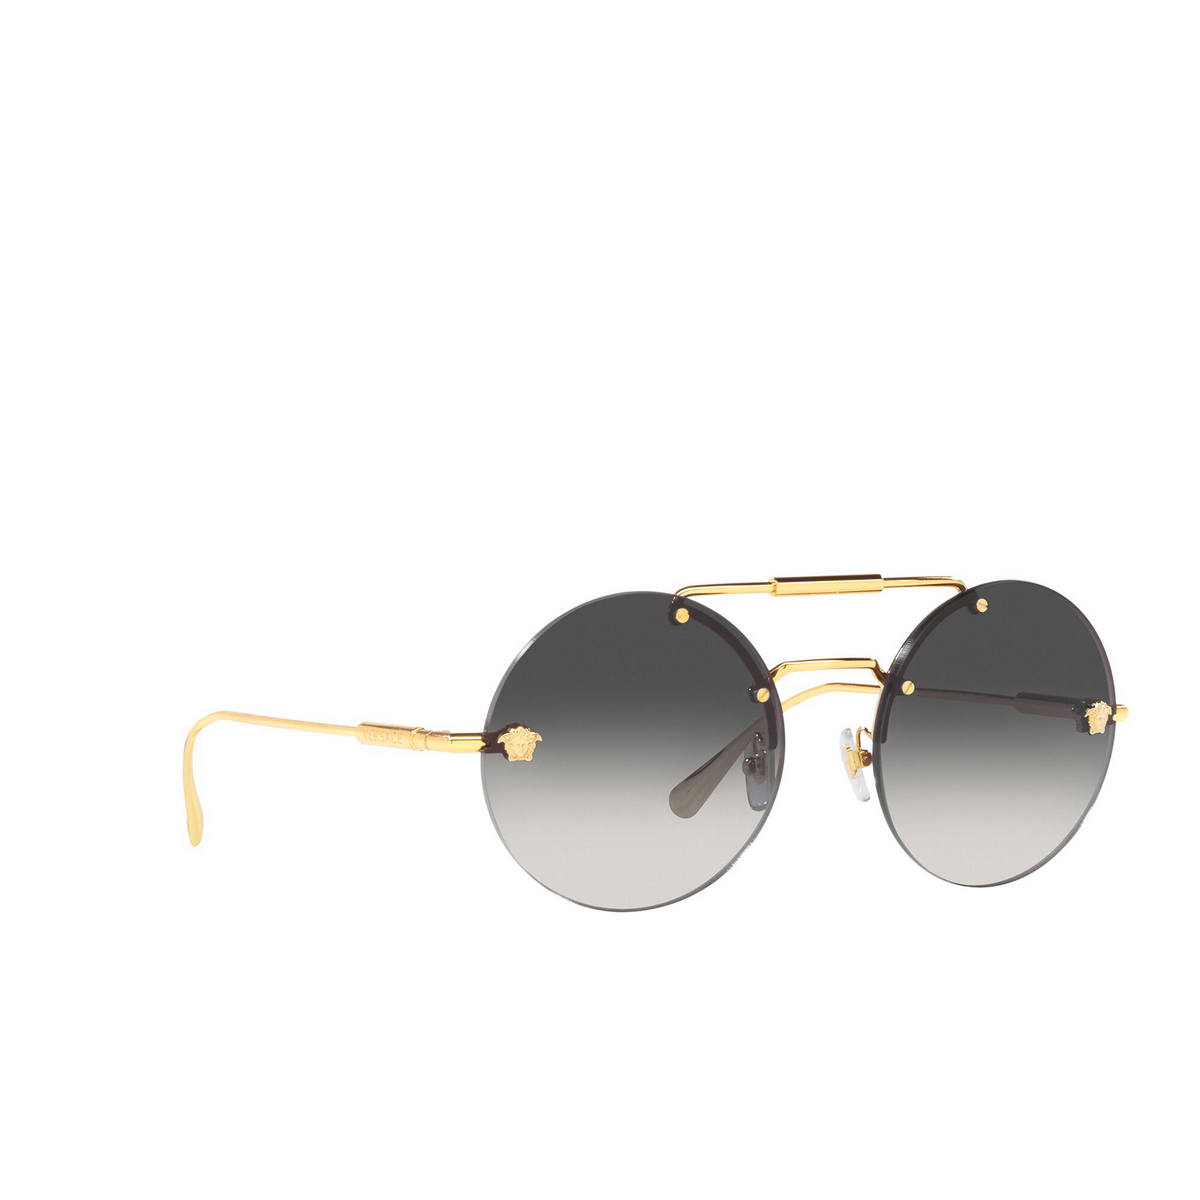 Versace® Round Sunglasses: VE2244 color Gold 10028G - three-quarters view.